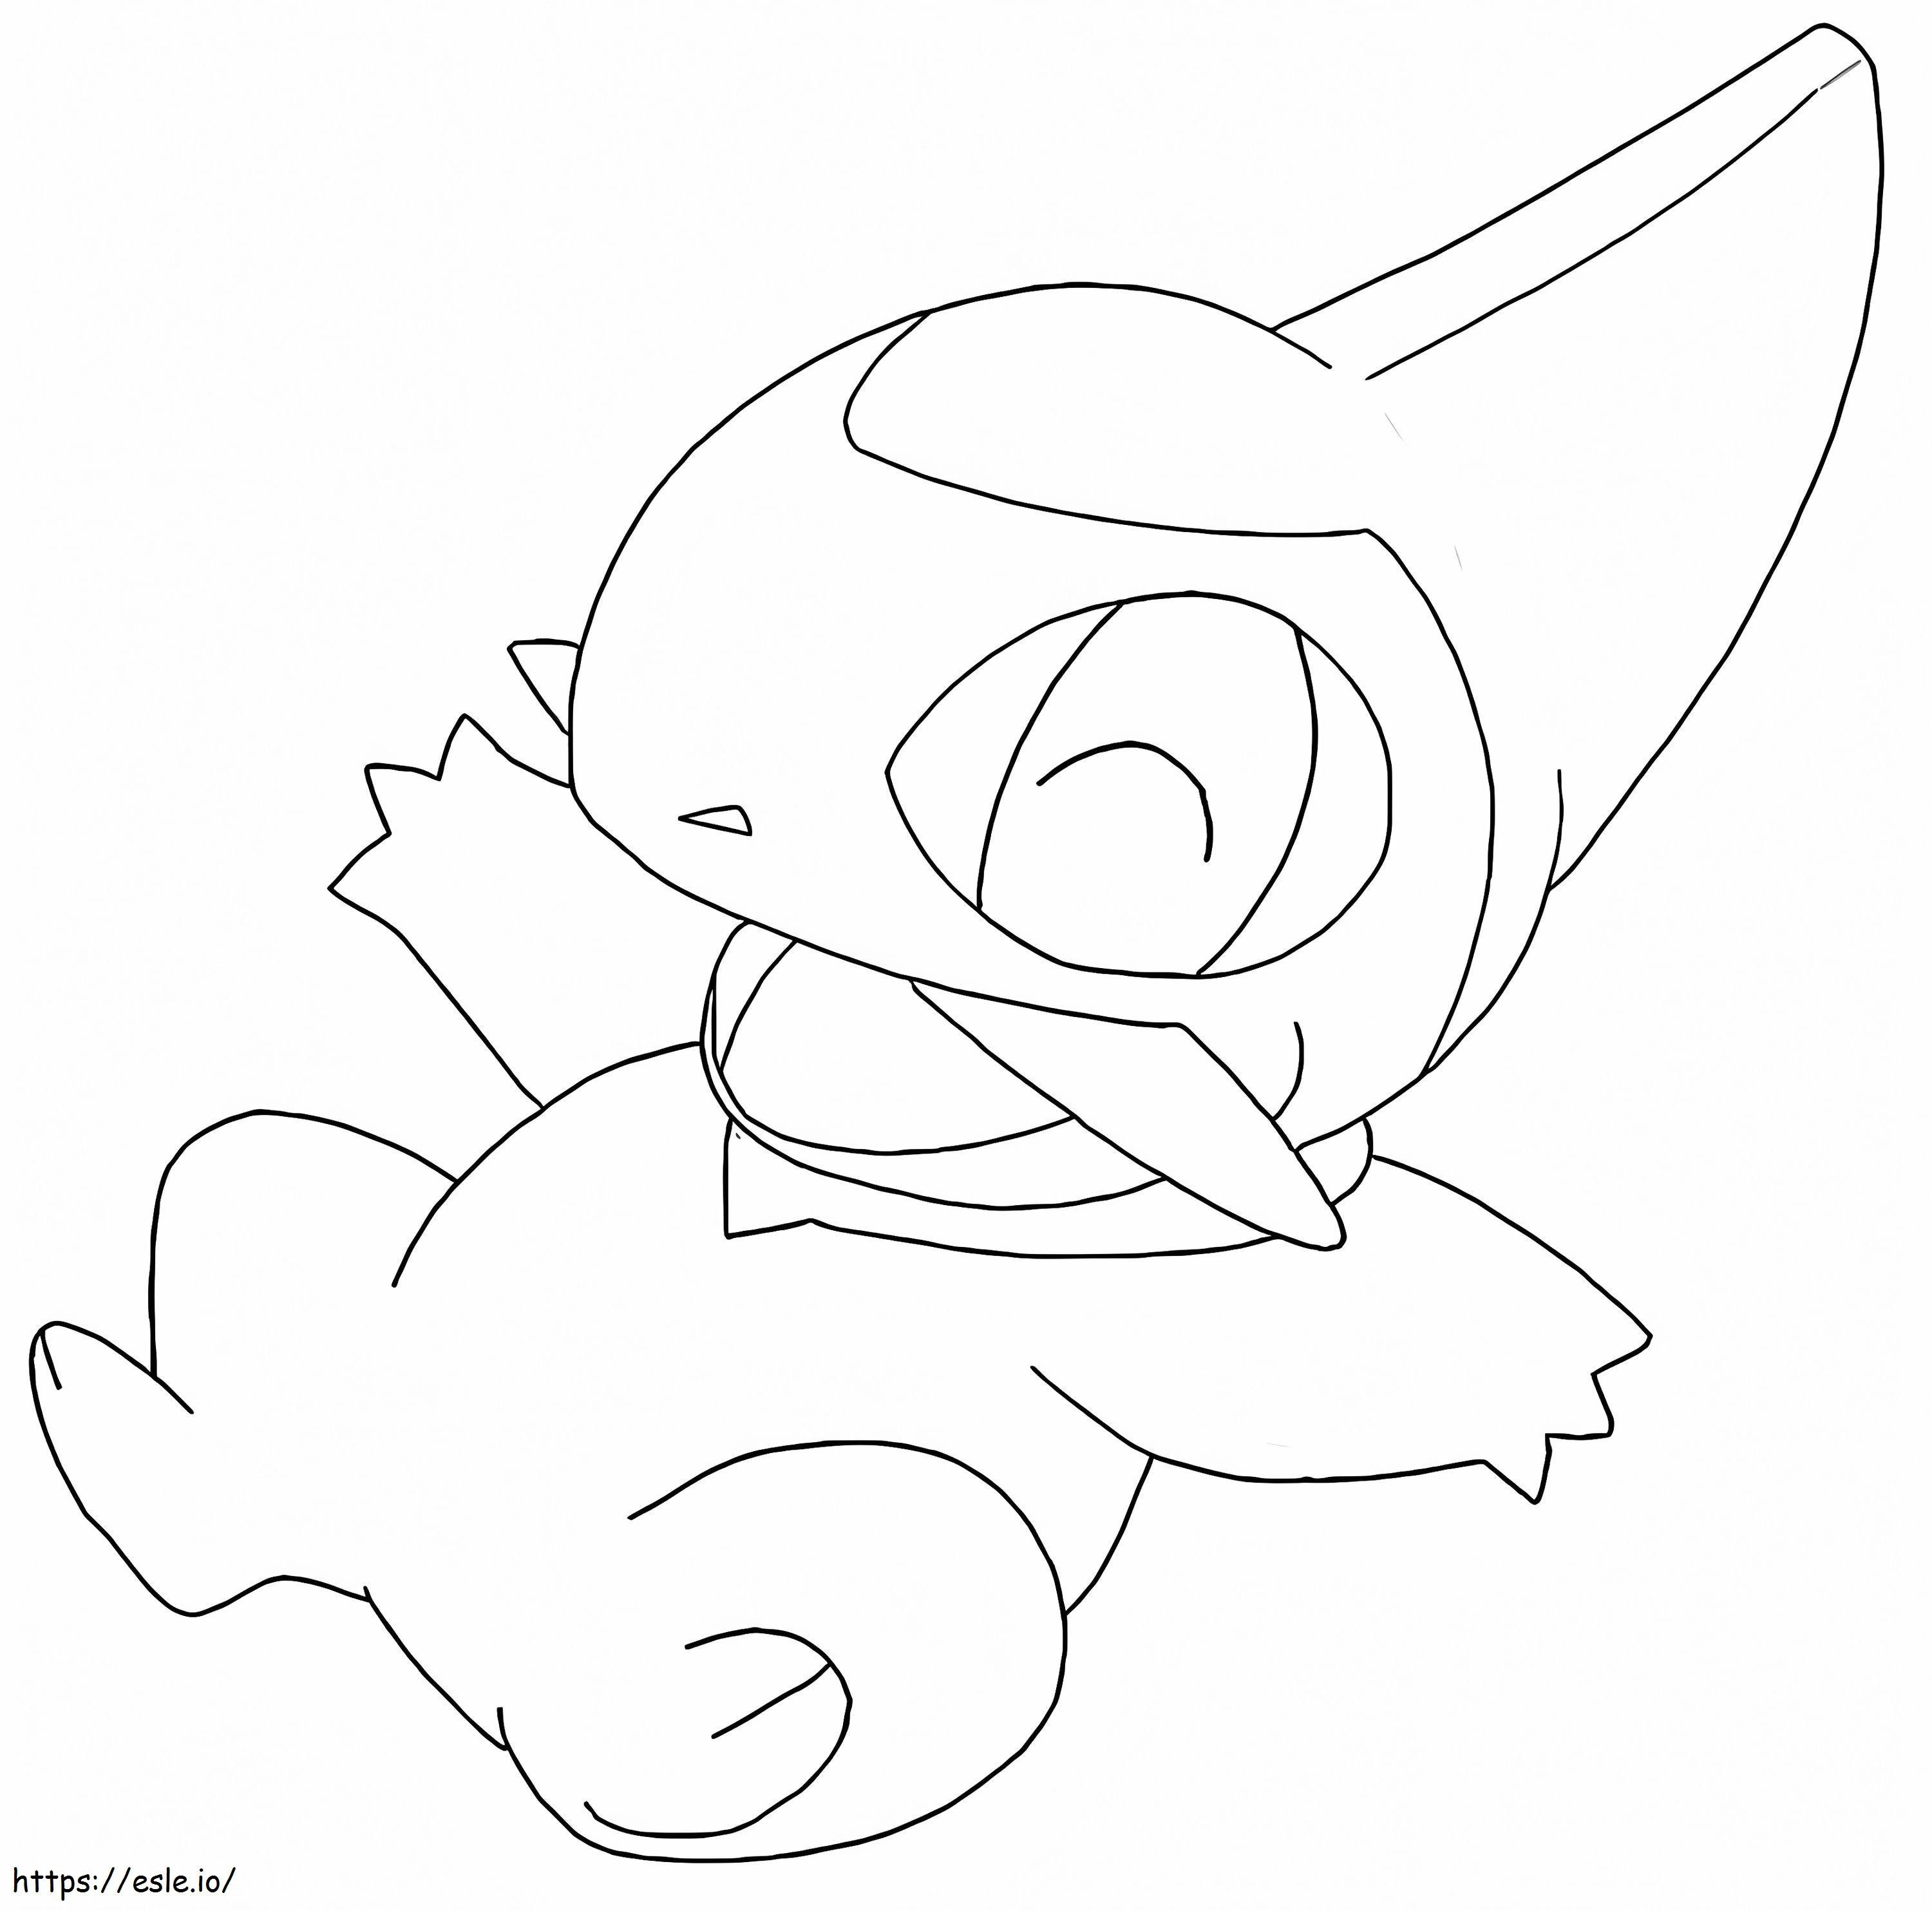 Axew Pokemon 3 coloring page